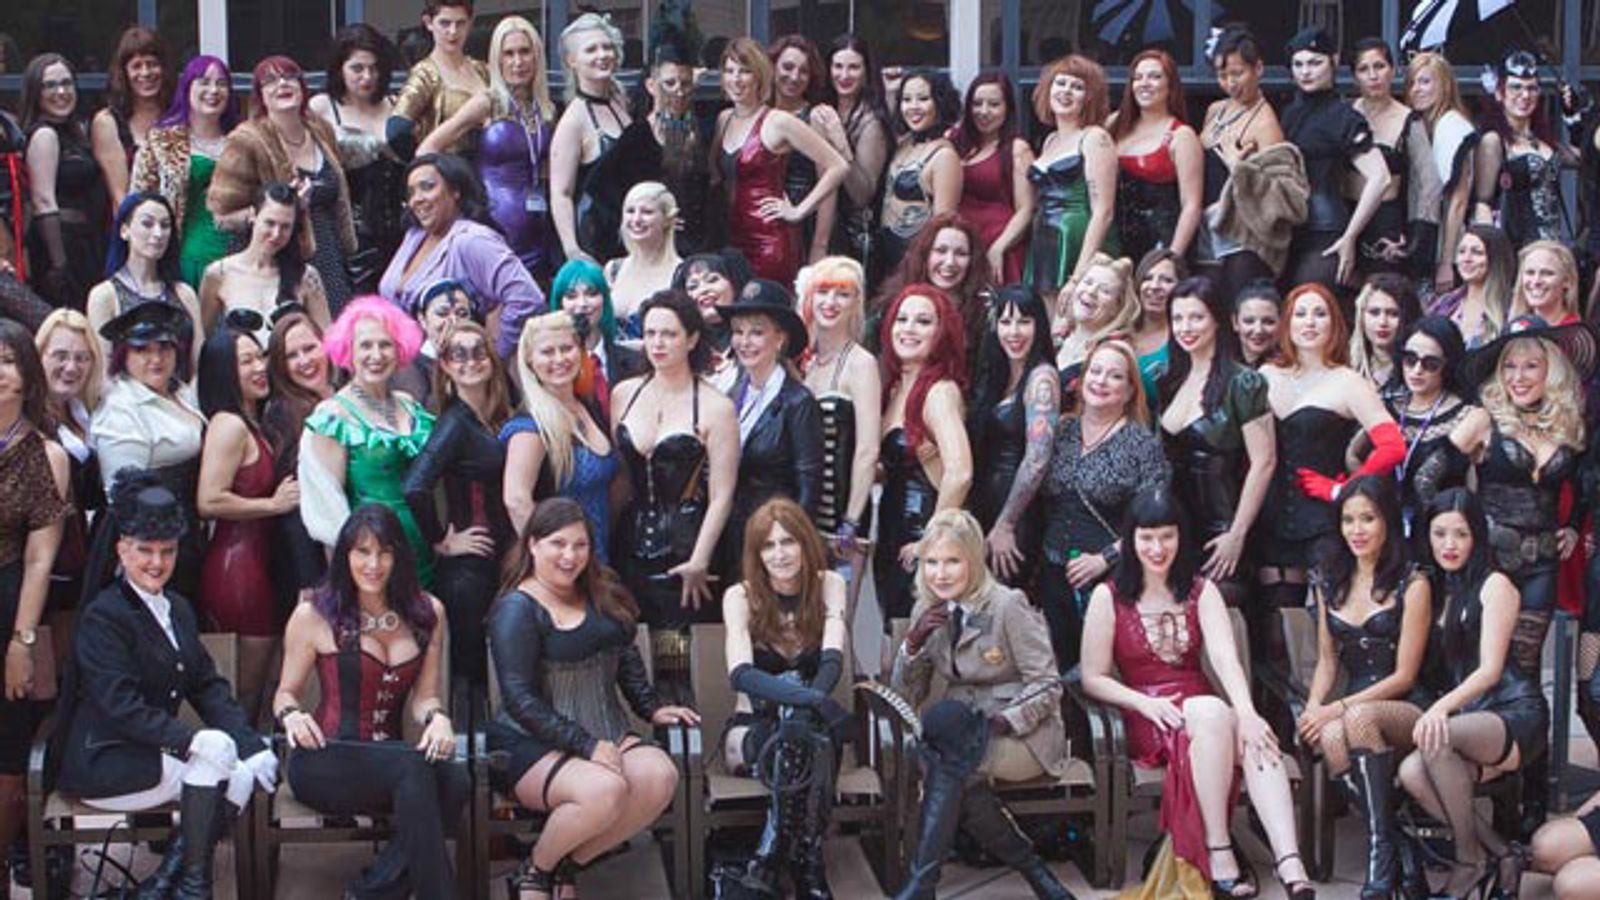 Early Registration Opens for DomCon LA 2016